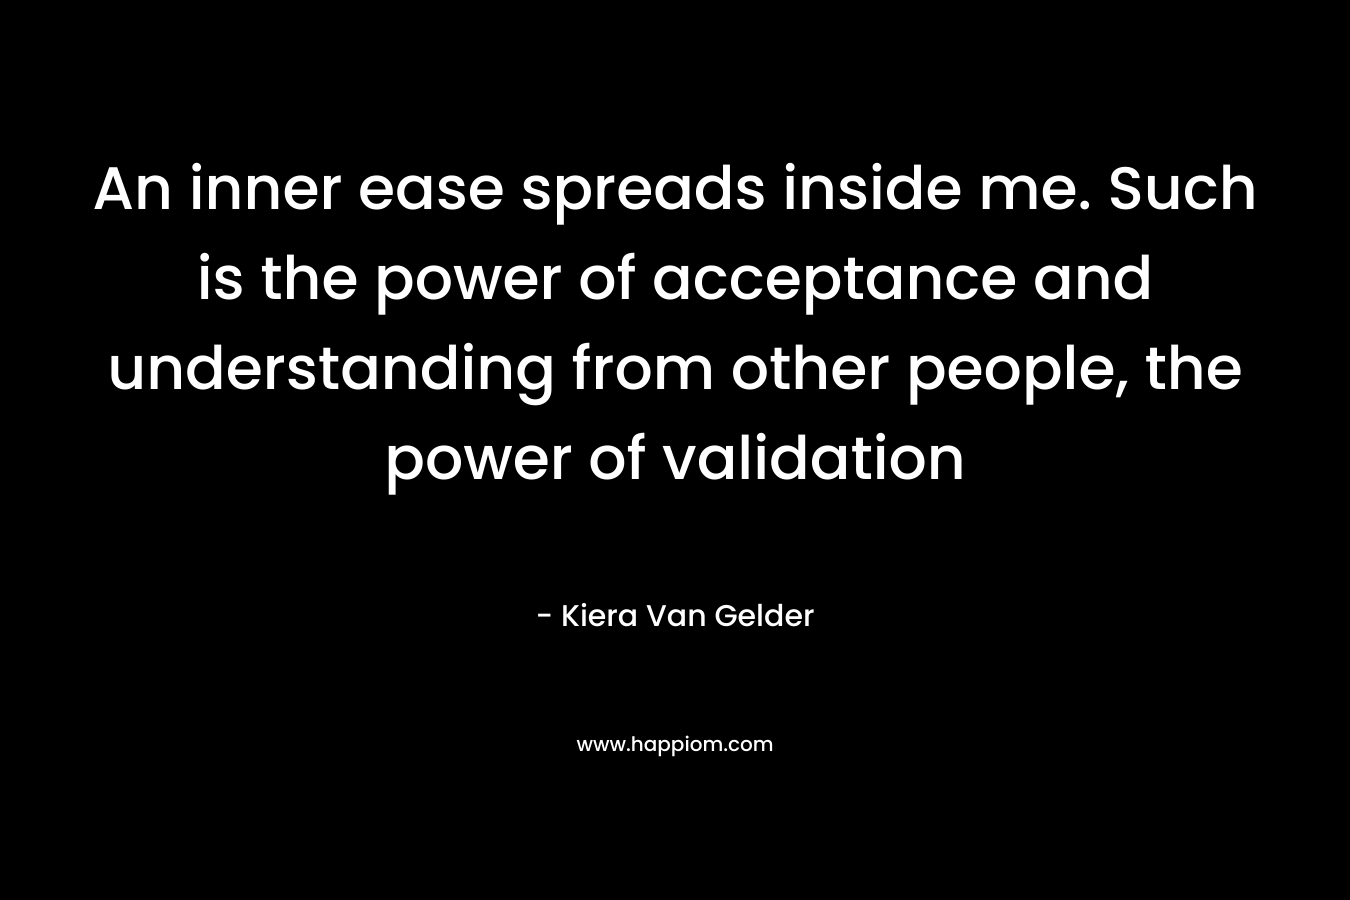 An inner ease spreads inside me. Such is the power of acceptance and understanding from other people, the power of validation – Kiera Van Gelder